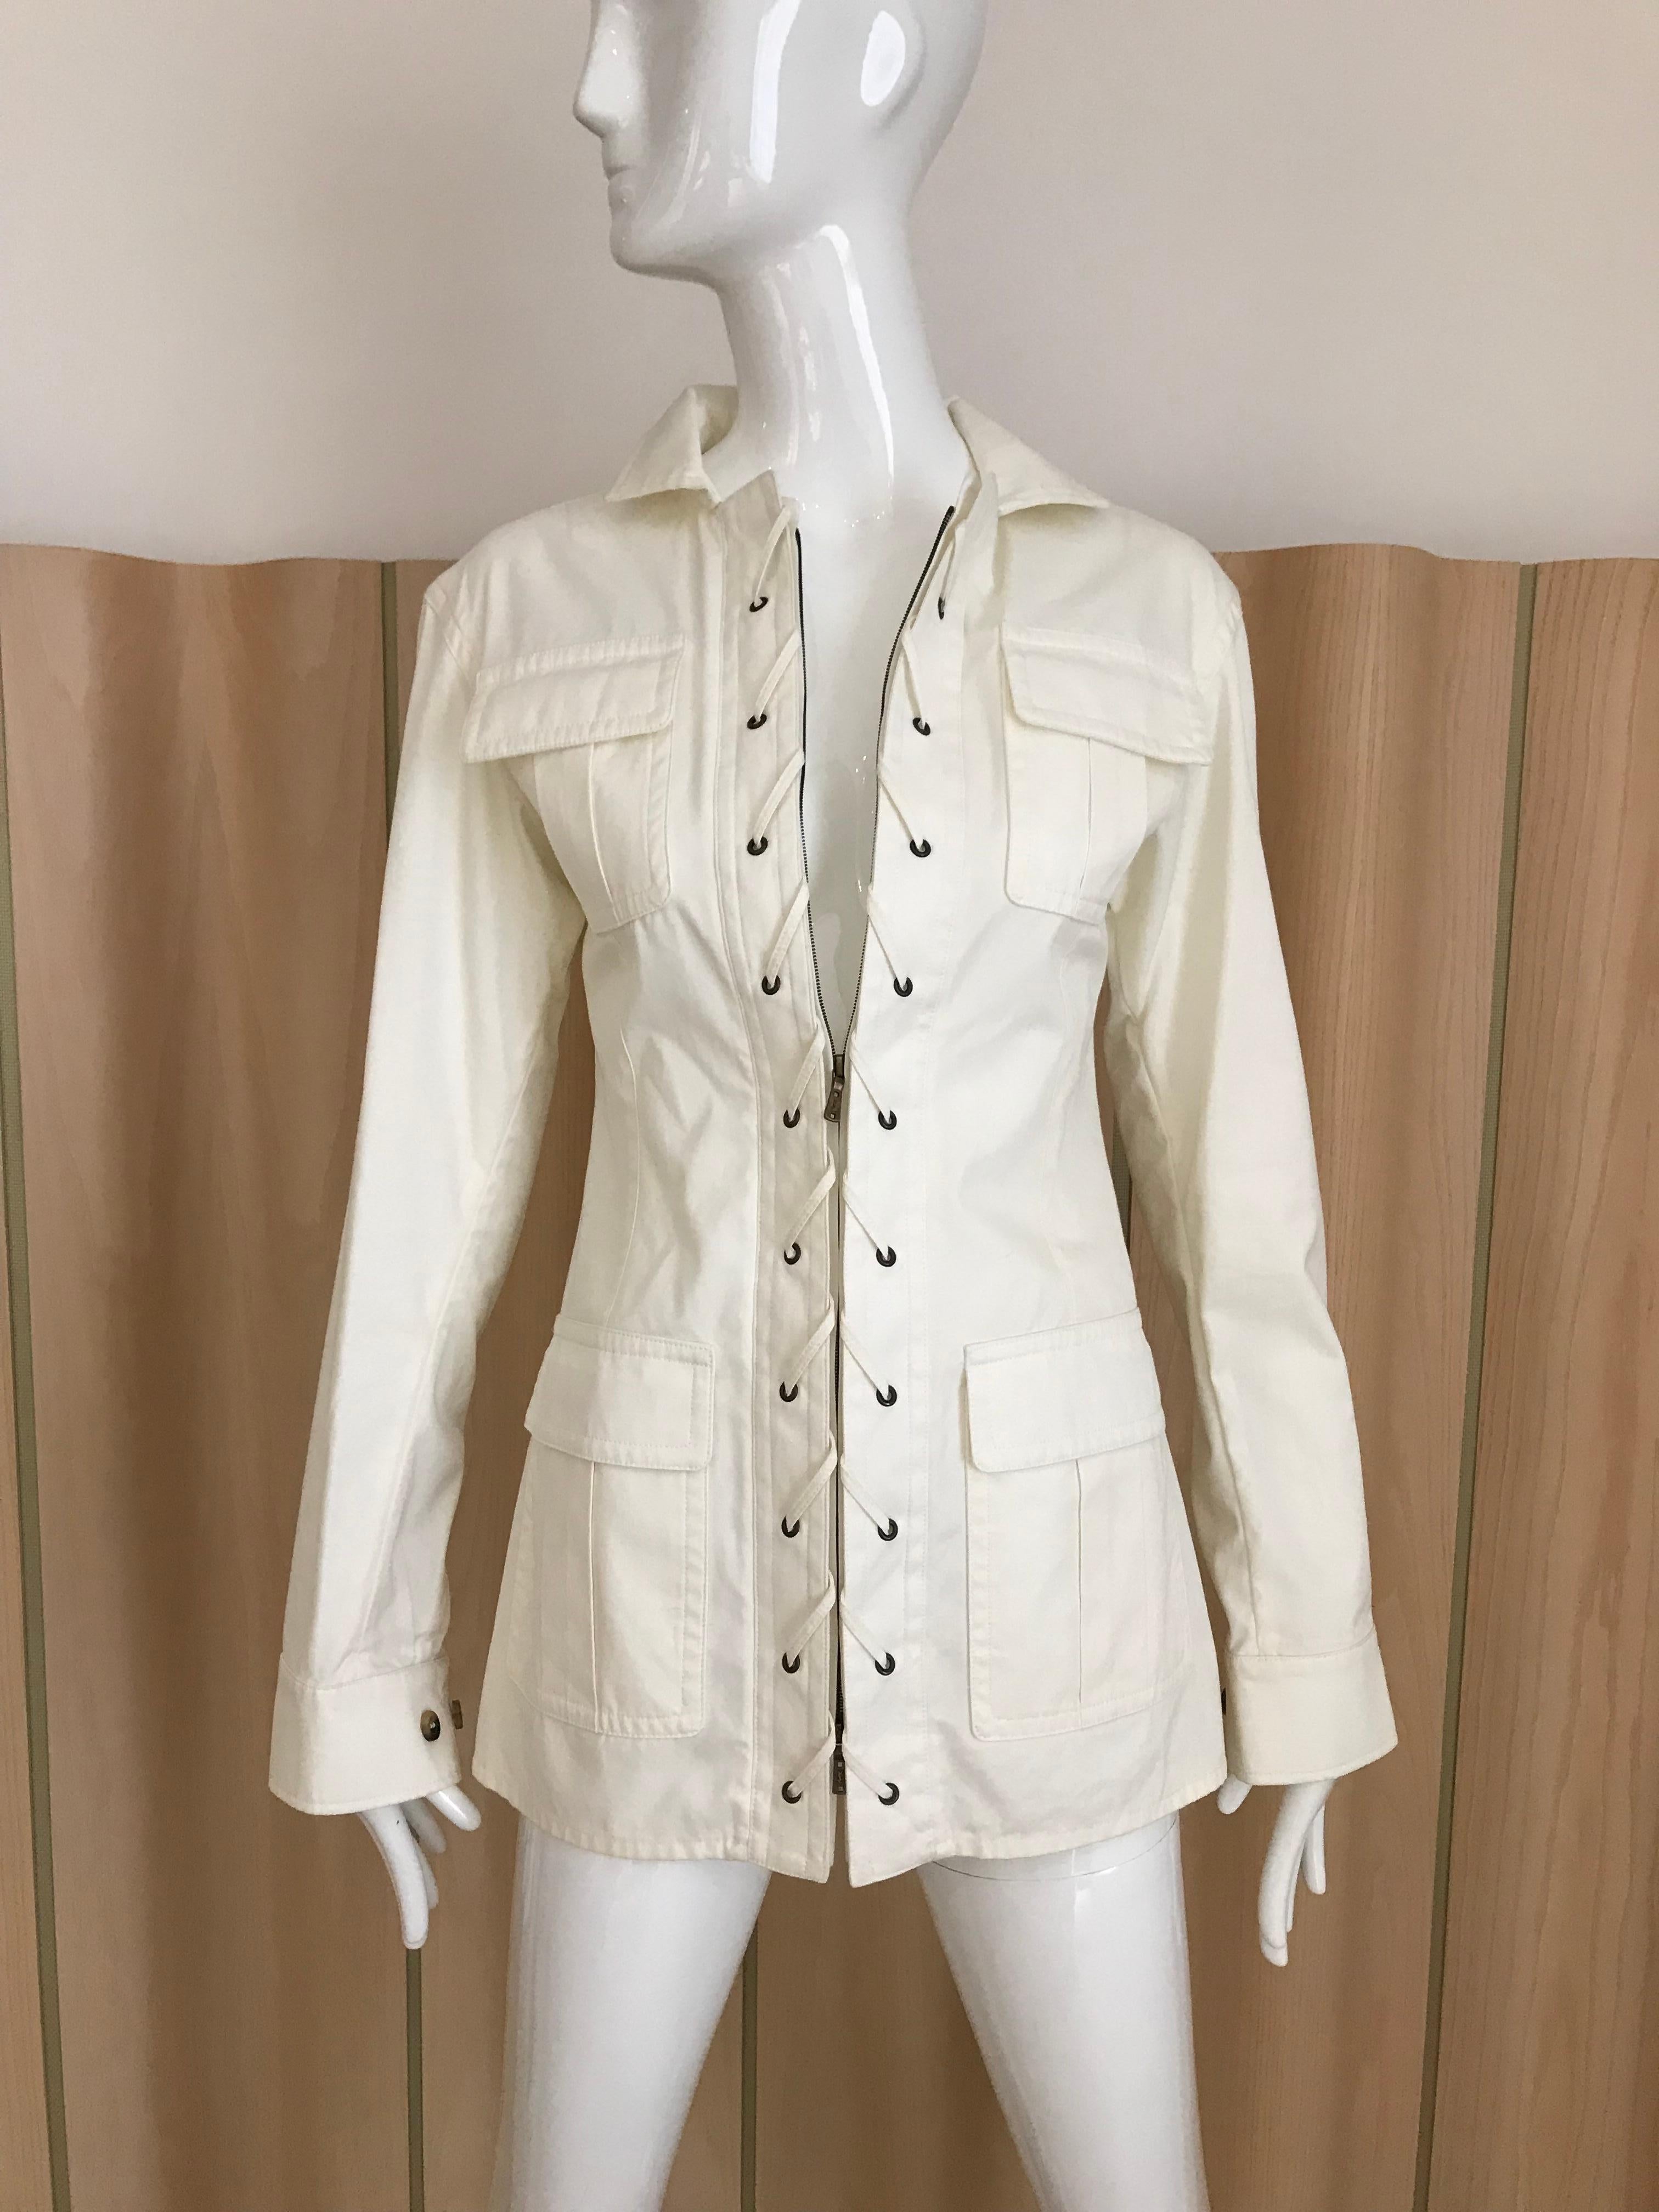 Yves Saint Laurent white cotton long sleeve safari style Jacket with zipper unworn with store tag.
Fit size 4. Jacket marked F36